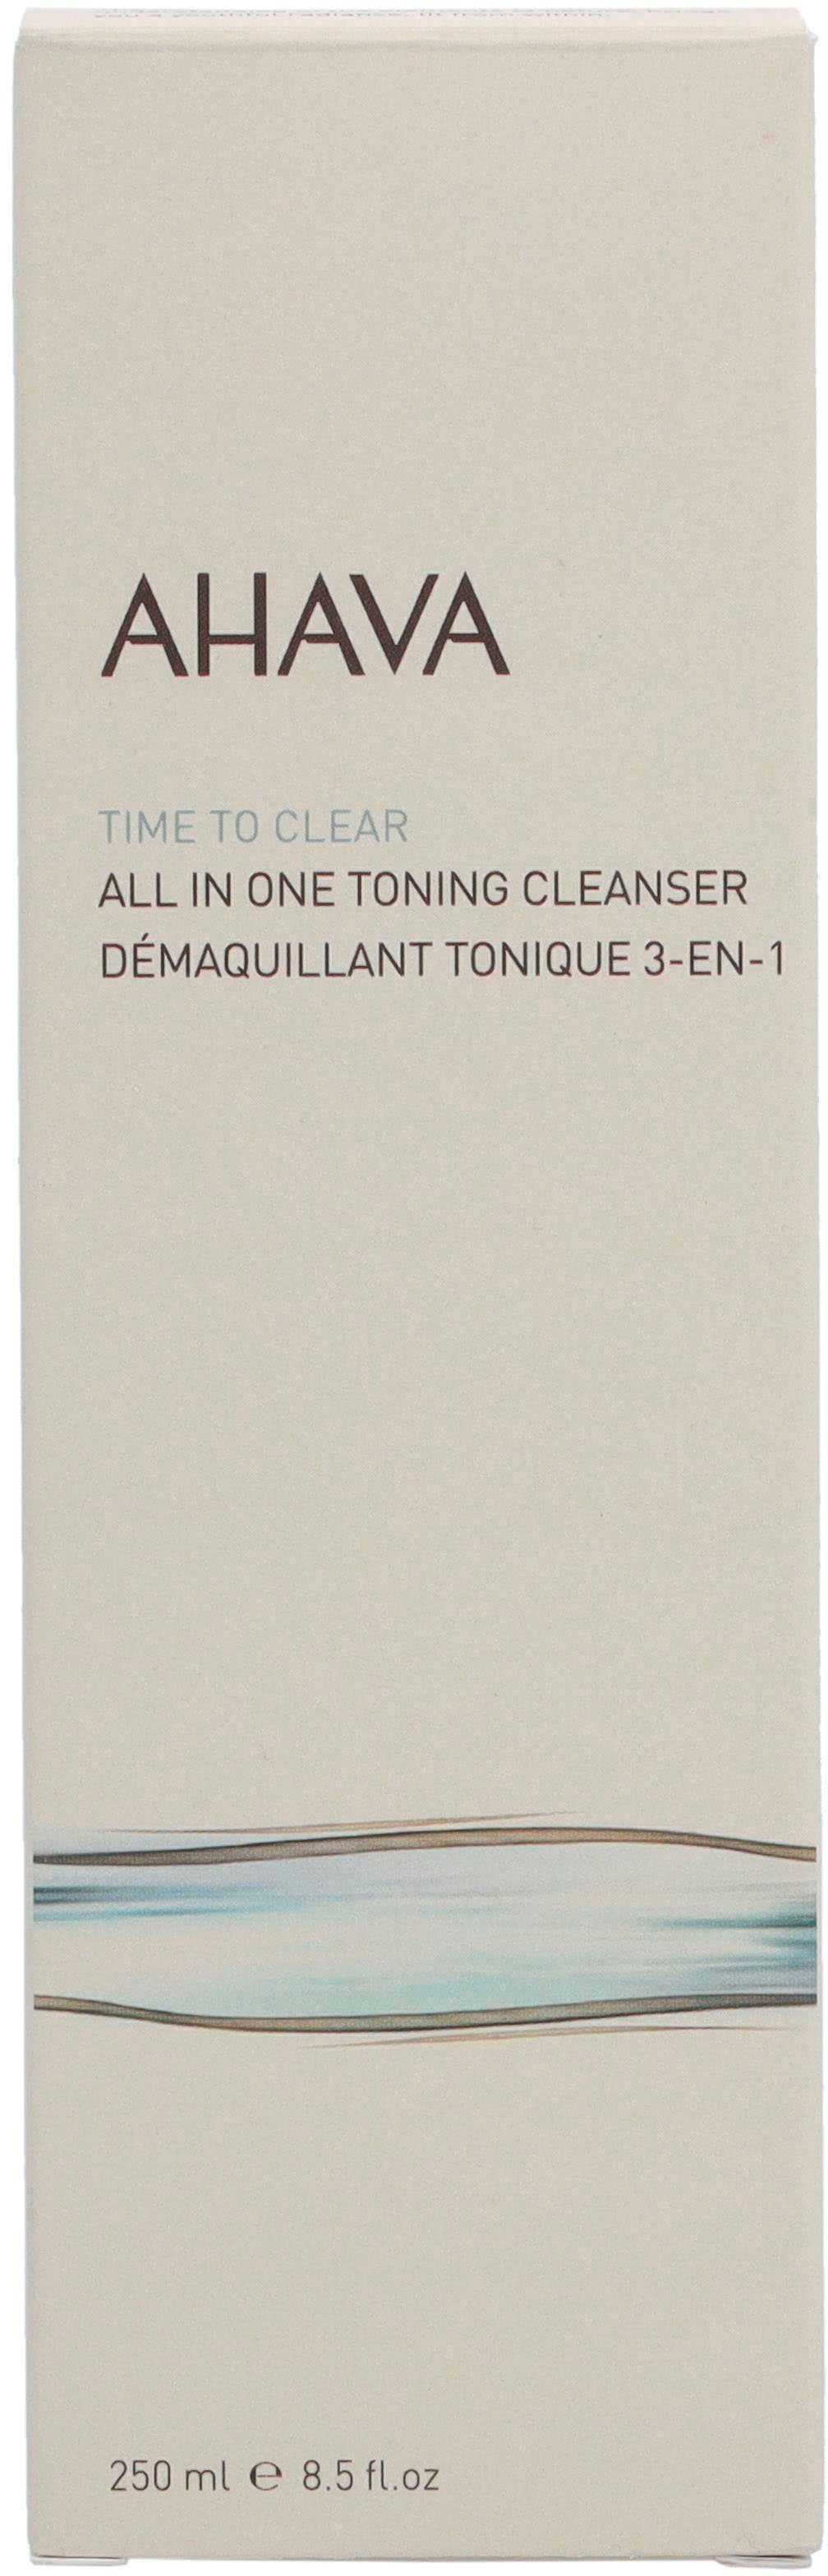 All One Gesichts-Reinigungslotion Cleanser Toning In Clear To Time AHAVA